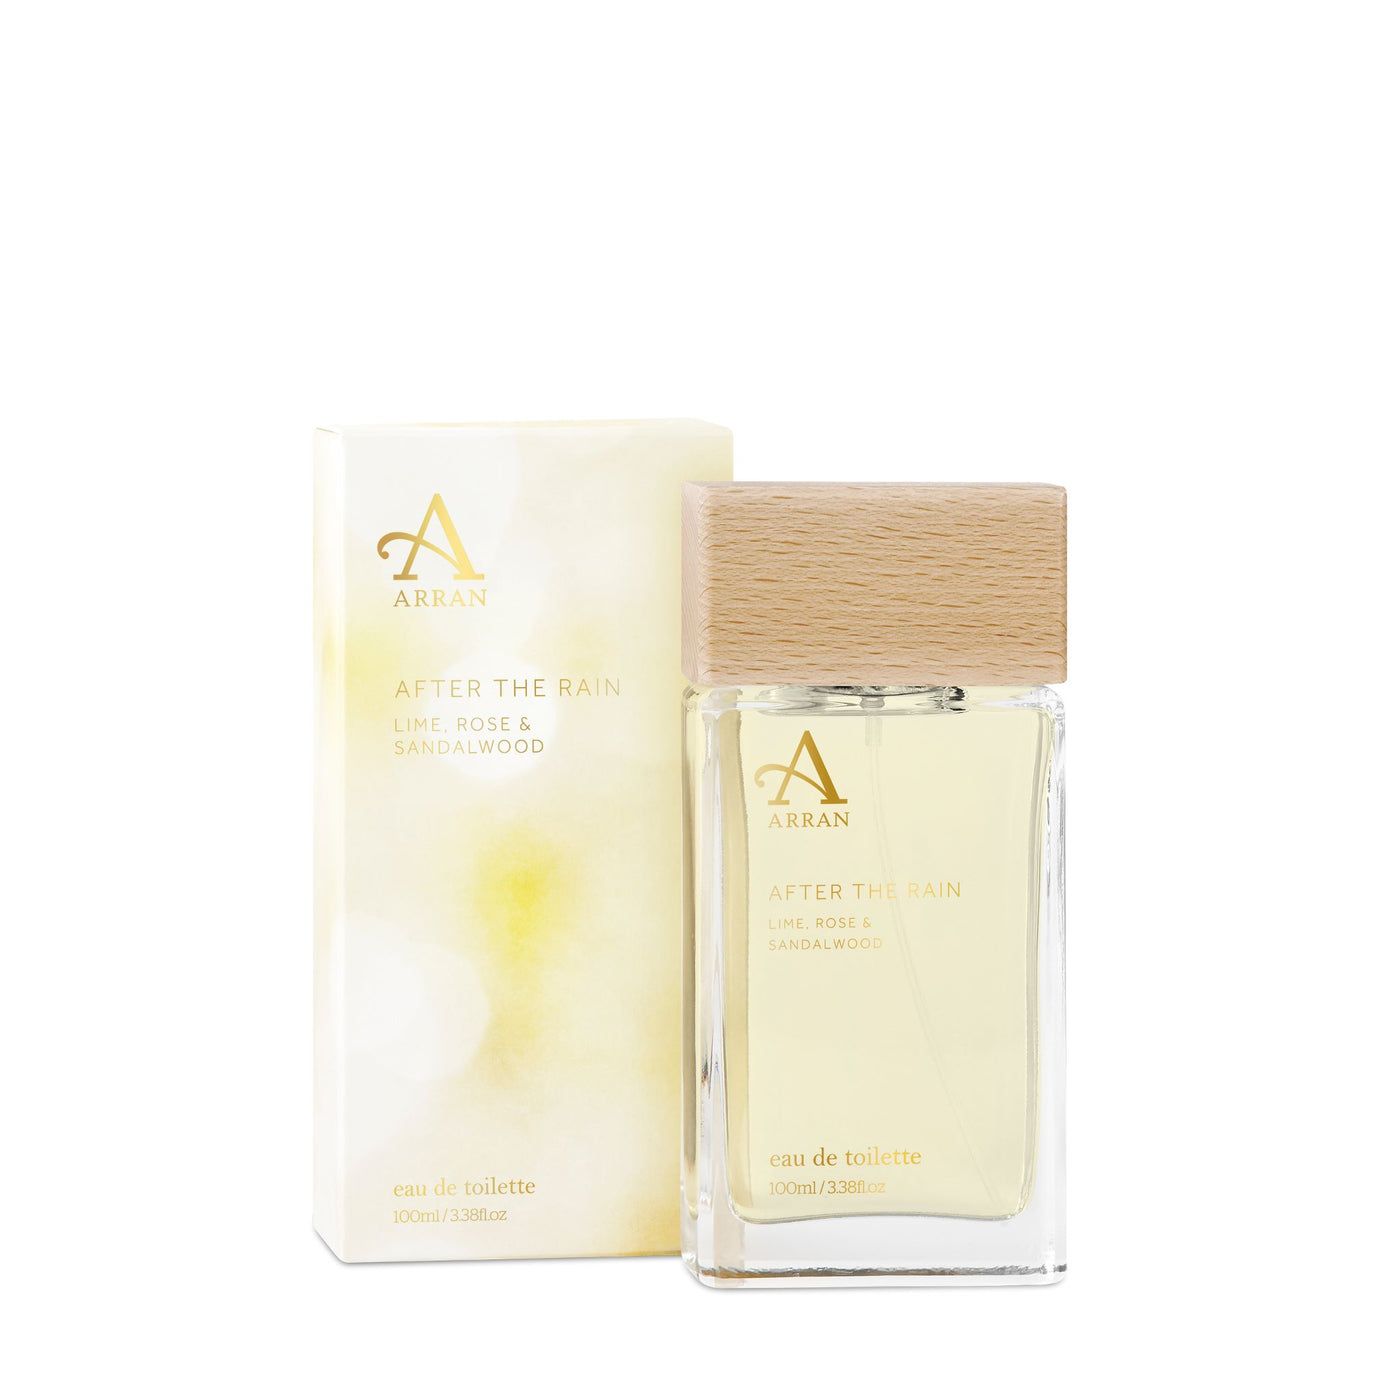 After the Rain eau de cologne from Arran Sense of Scotland. A refreshing scent of Lime, Rose & Sandalwood.